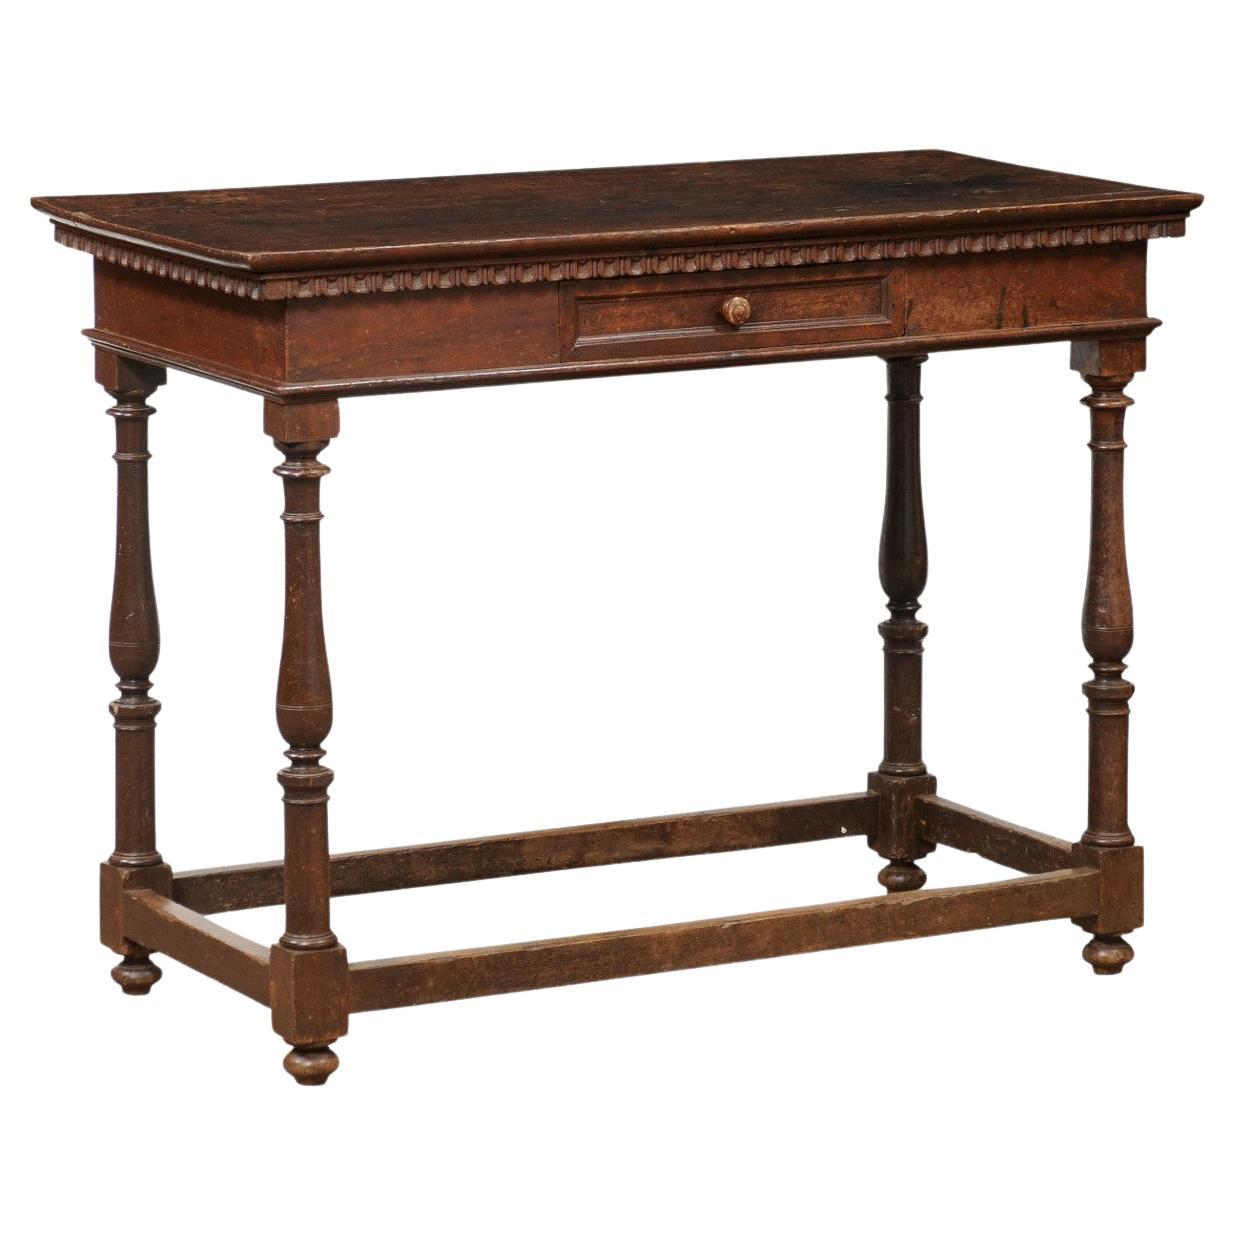 17th Century Italian Walnut Narrow Console / Center Table with Drawer